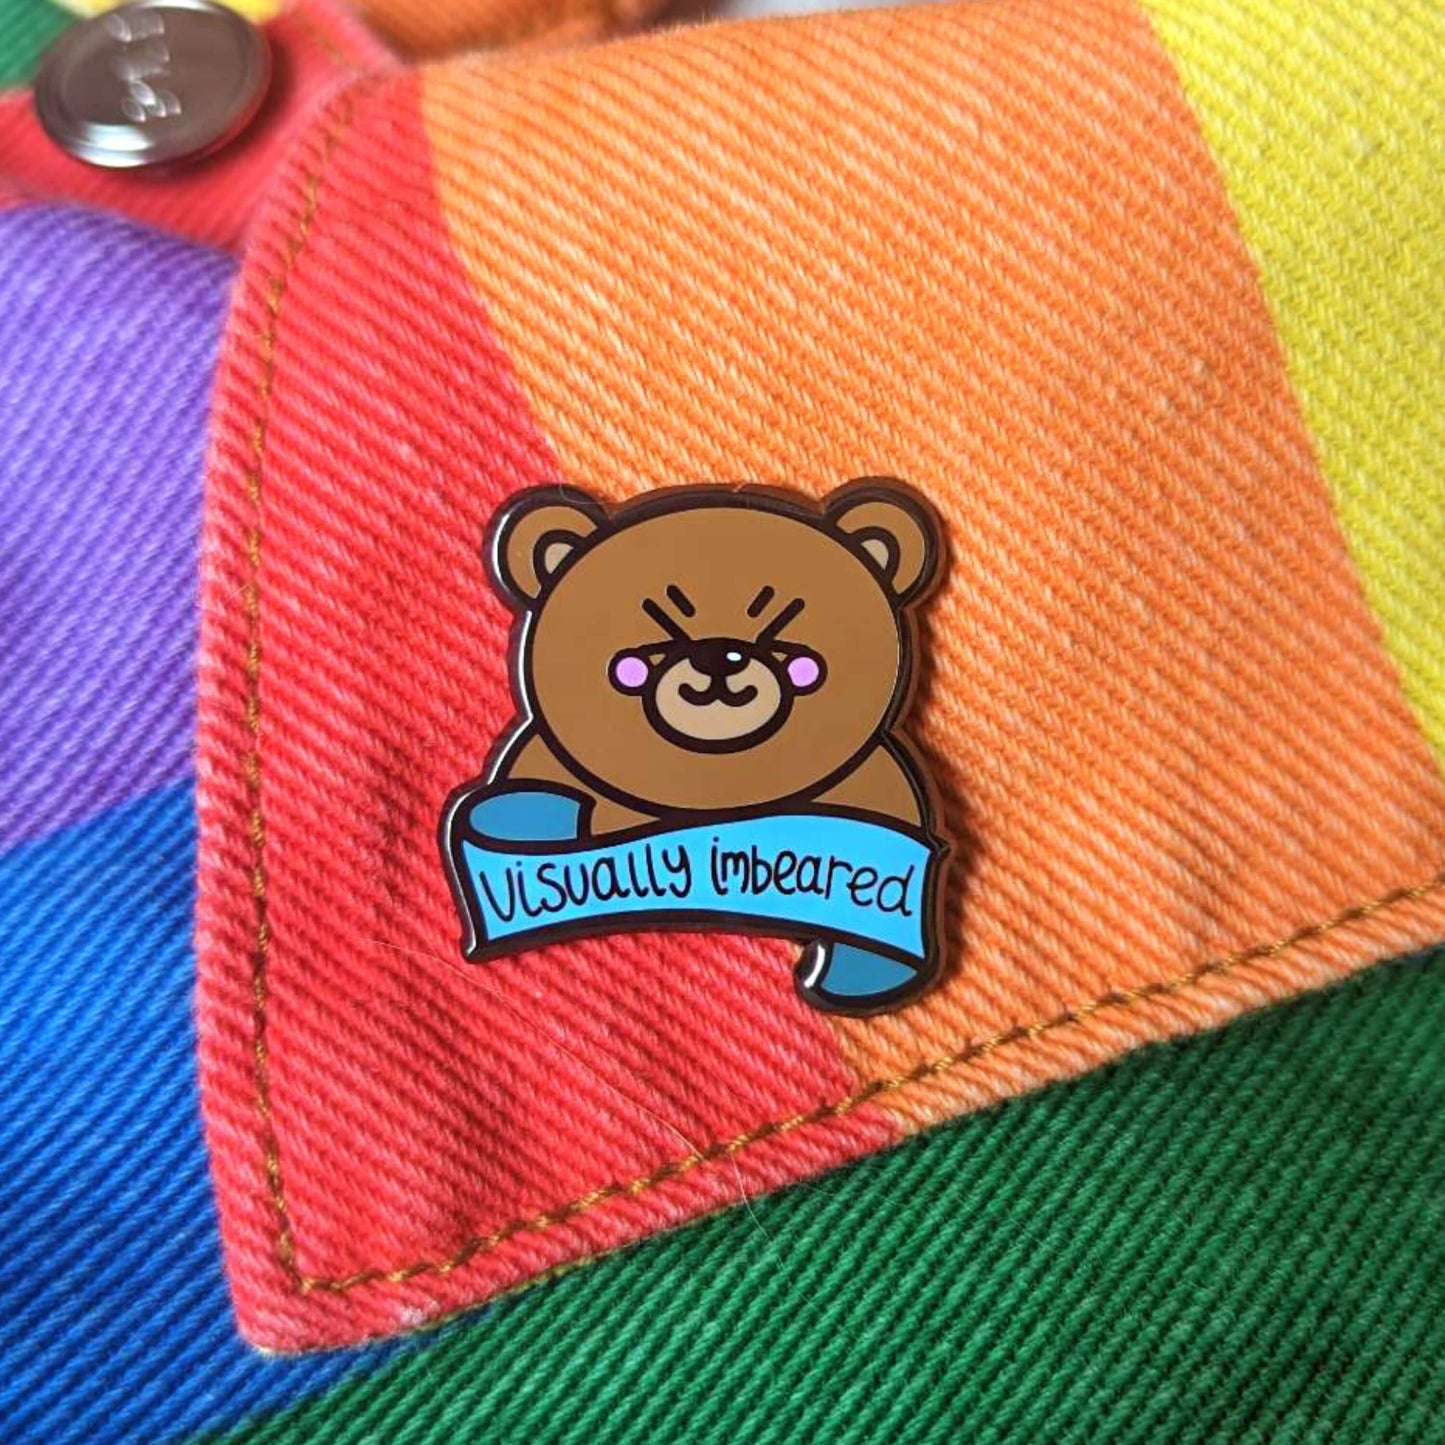 The Visually Imbeared Bear Enamel Pin - Visually Impaired on a rainbow denim jacket collar. The brown teddy bear shaped pin has its eyes scrunched shut smiling with pink cheeks, underneath is a blue banner with black text reading 'visually imbeared'. The hand drawn design is raising awareness for visual impairment and blindness.